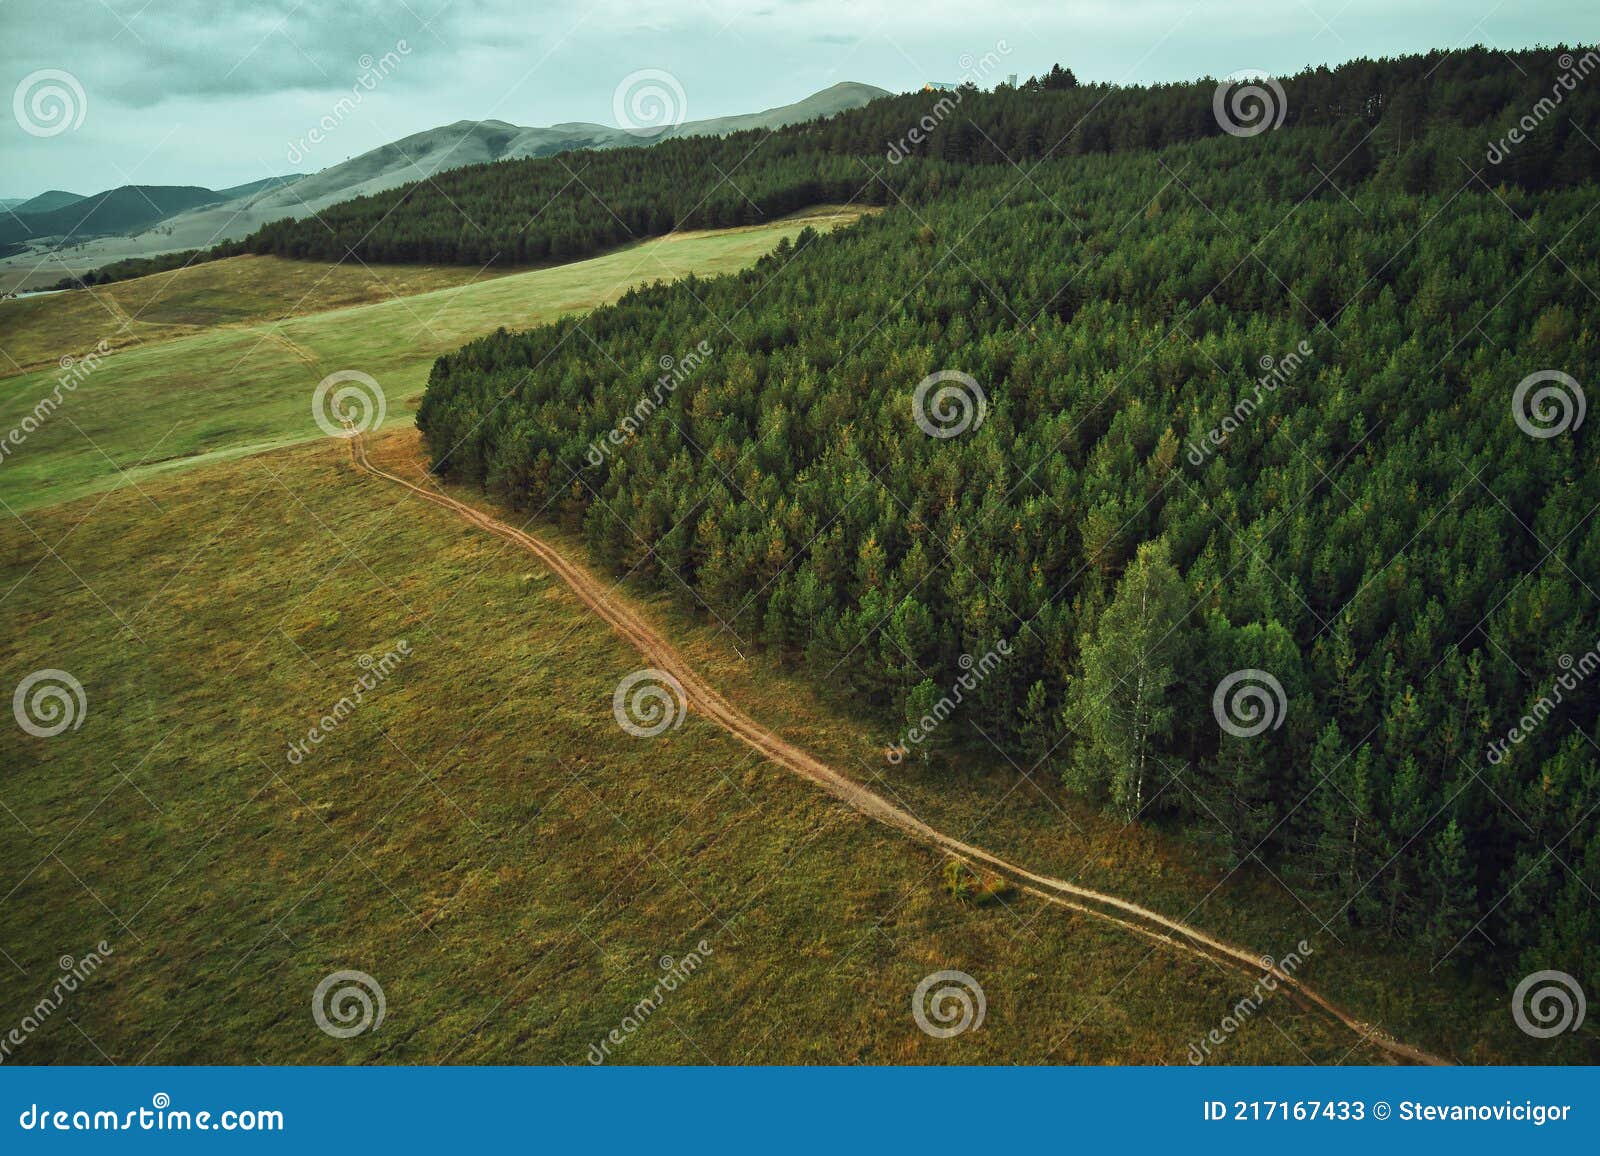 Aerial View Of Golden Pine Forest At Zlatibor Mountain In Serbia Stock